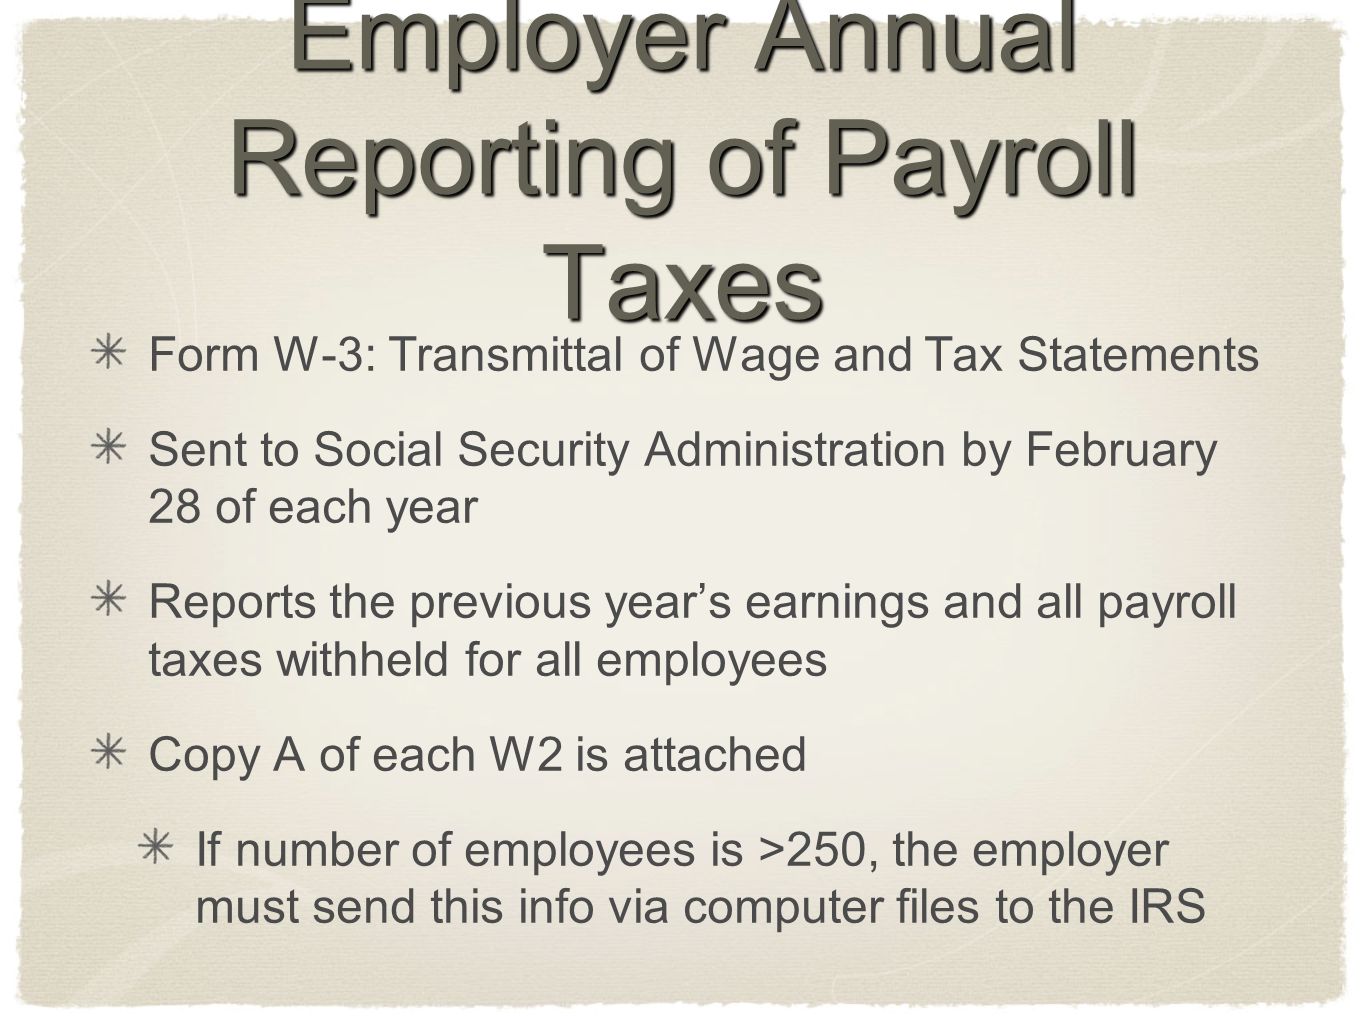 Employer Annual Reporting of Payroll Taxes